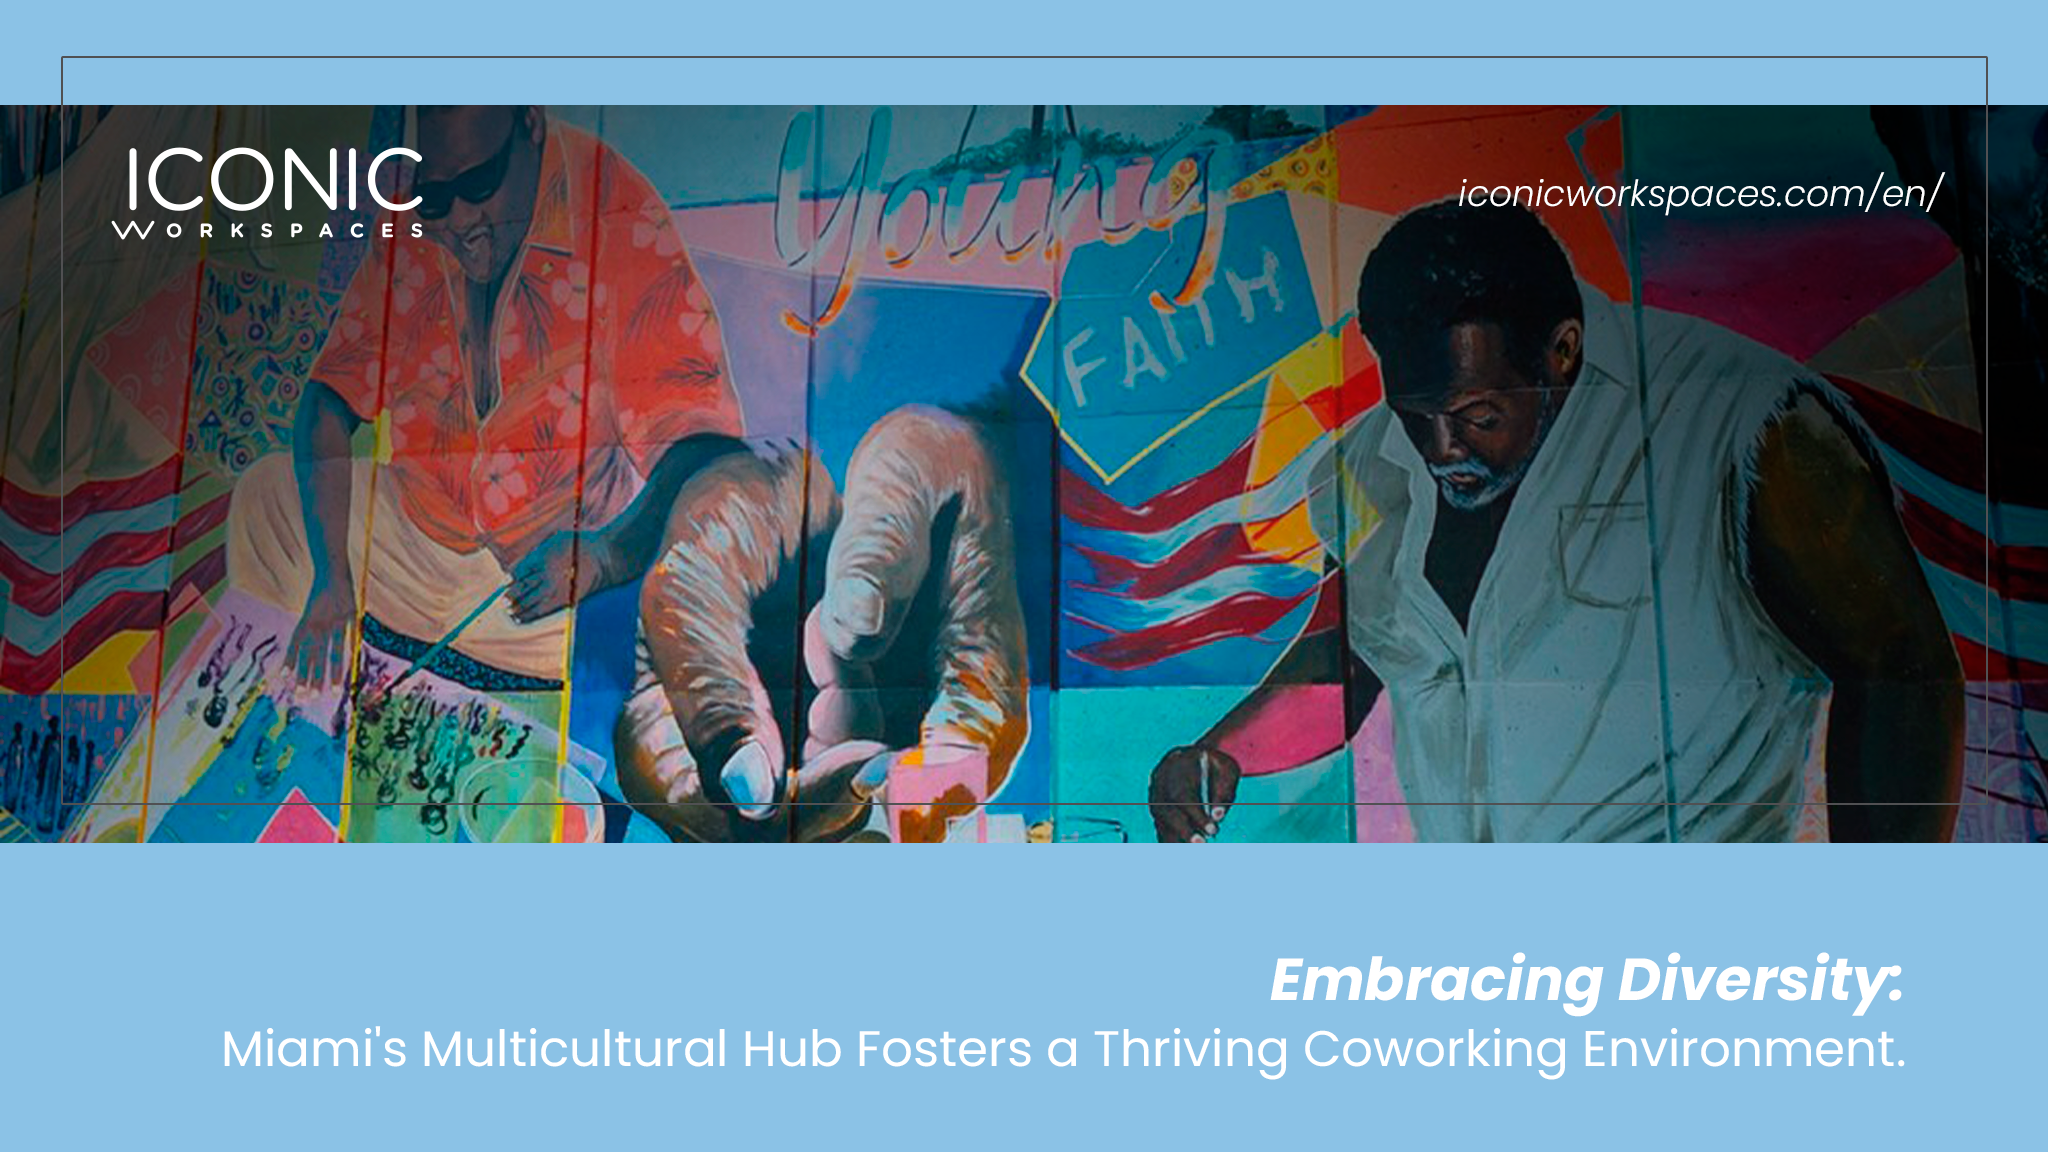 Embracing Diversity: Miami's Multicultural Hub Fosters a Thriving Coworking Environment